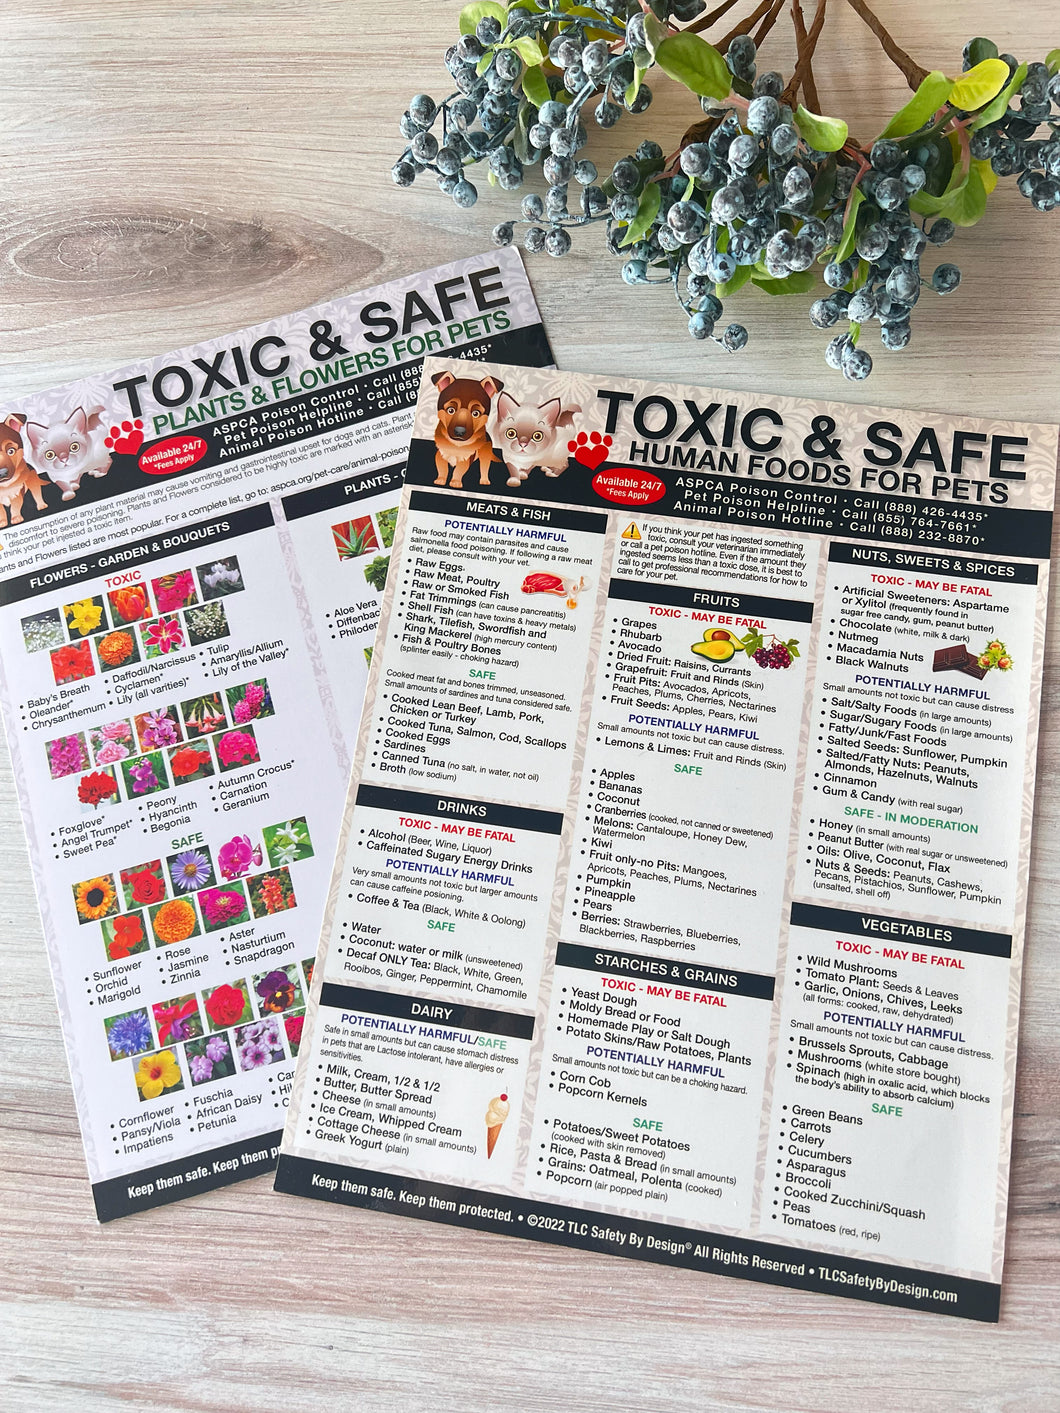 Premium Set of 2 Toxic and Safe Foods, Plants & Flowers for Pets Dogs Cats Emergency 8.5